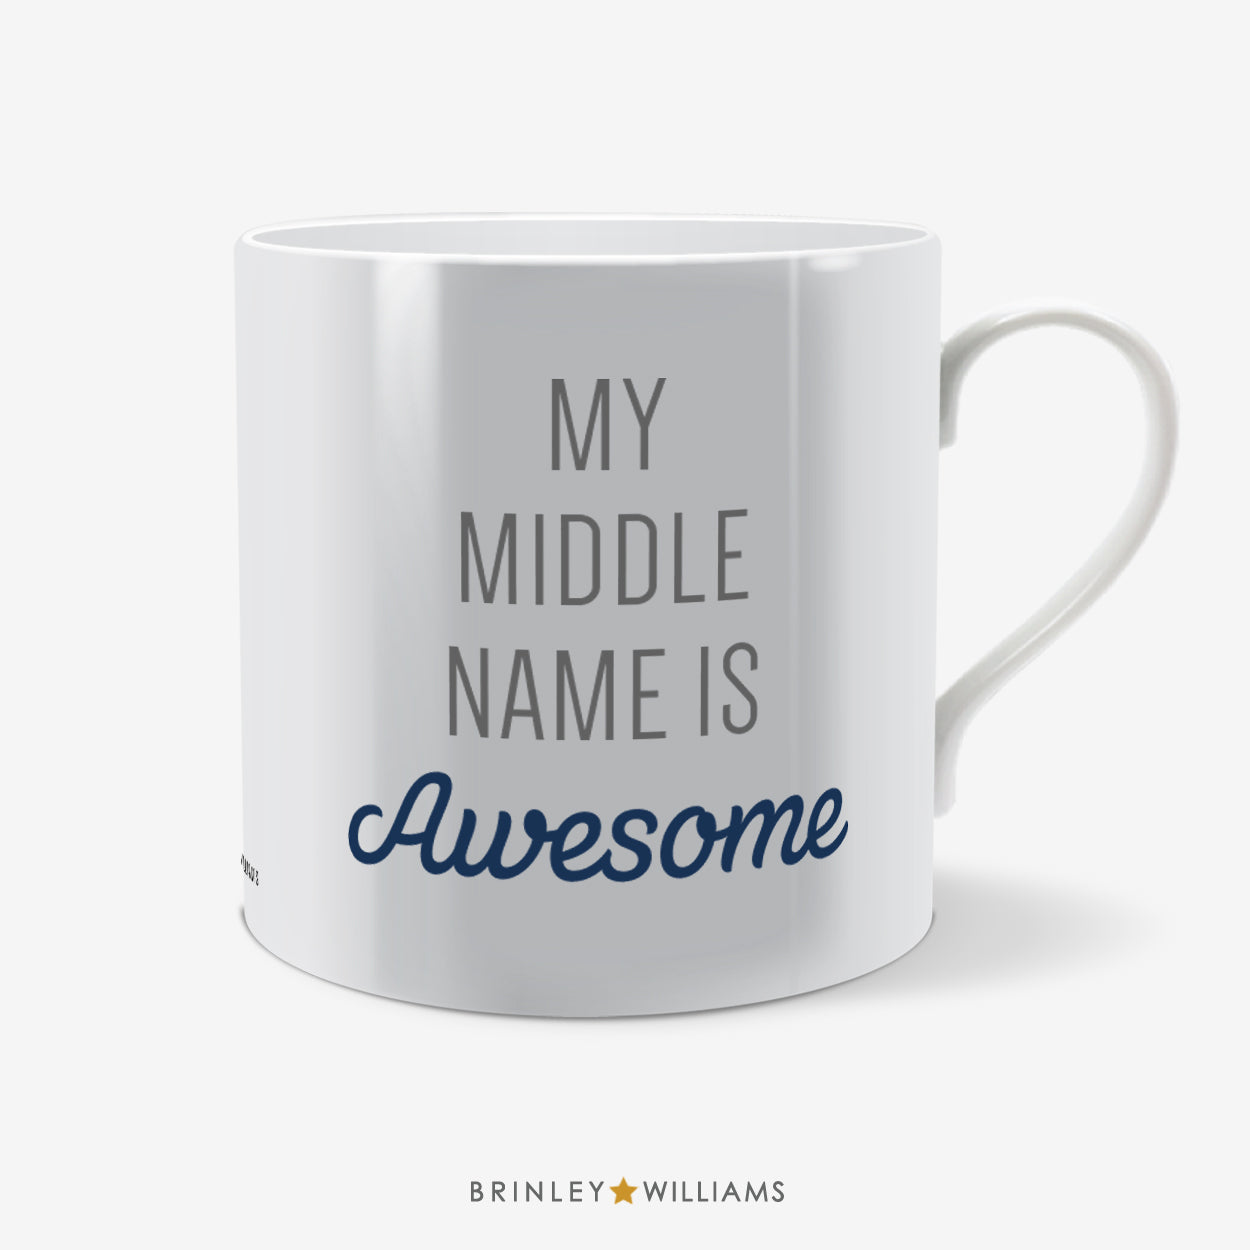 My Middle Name is Awesome Fun Mug - Navy